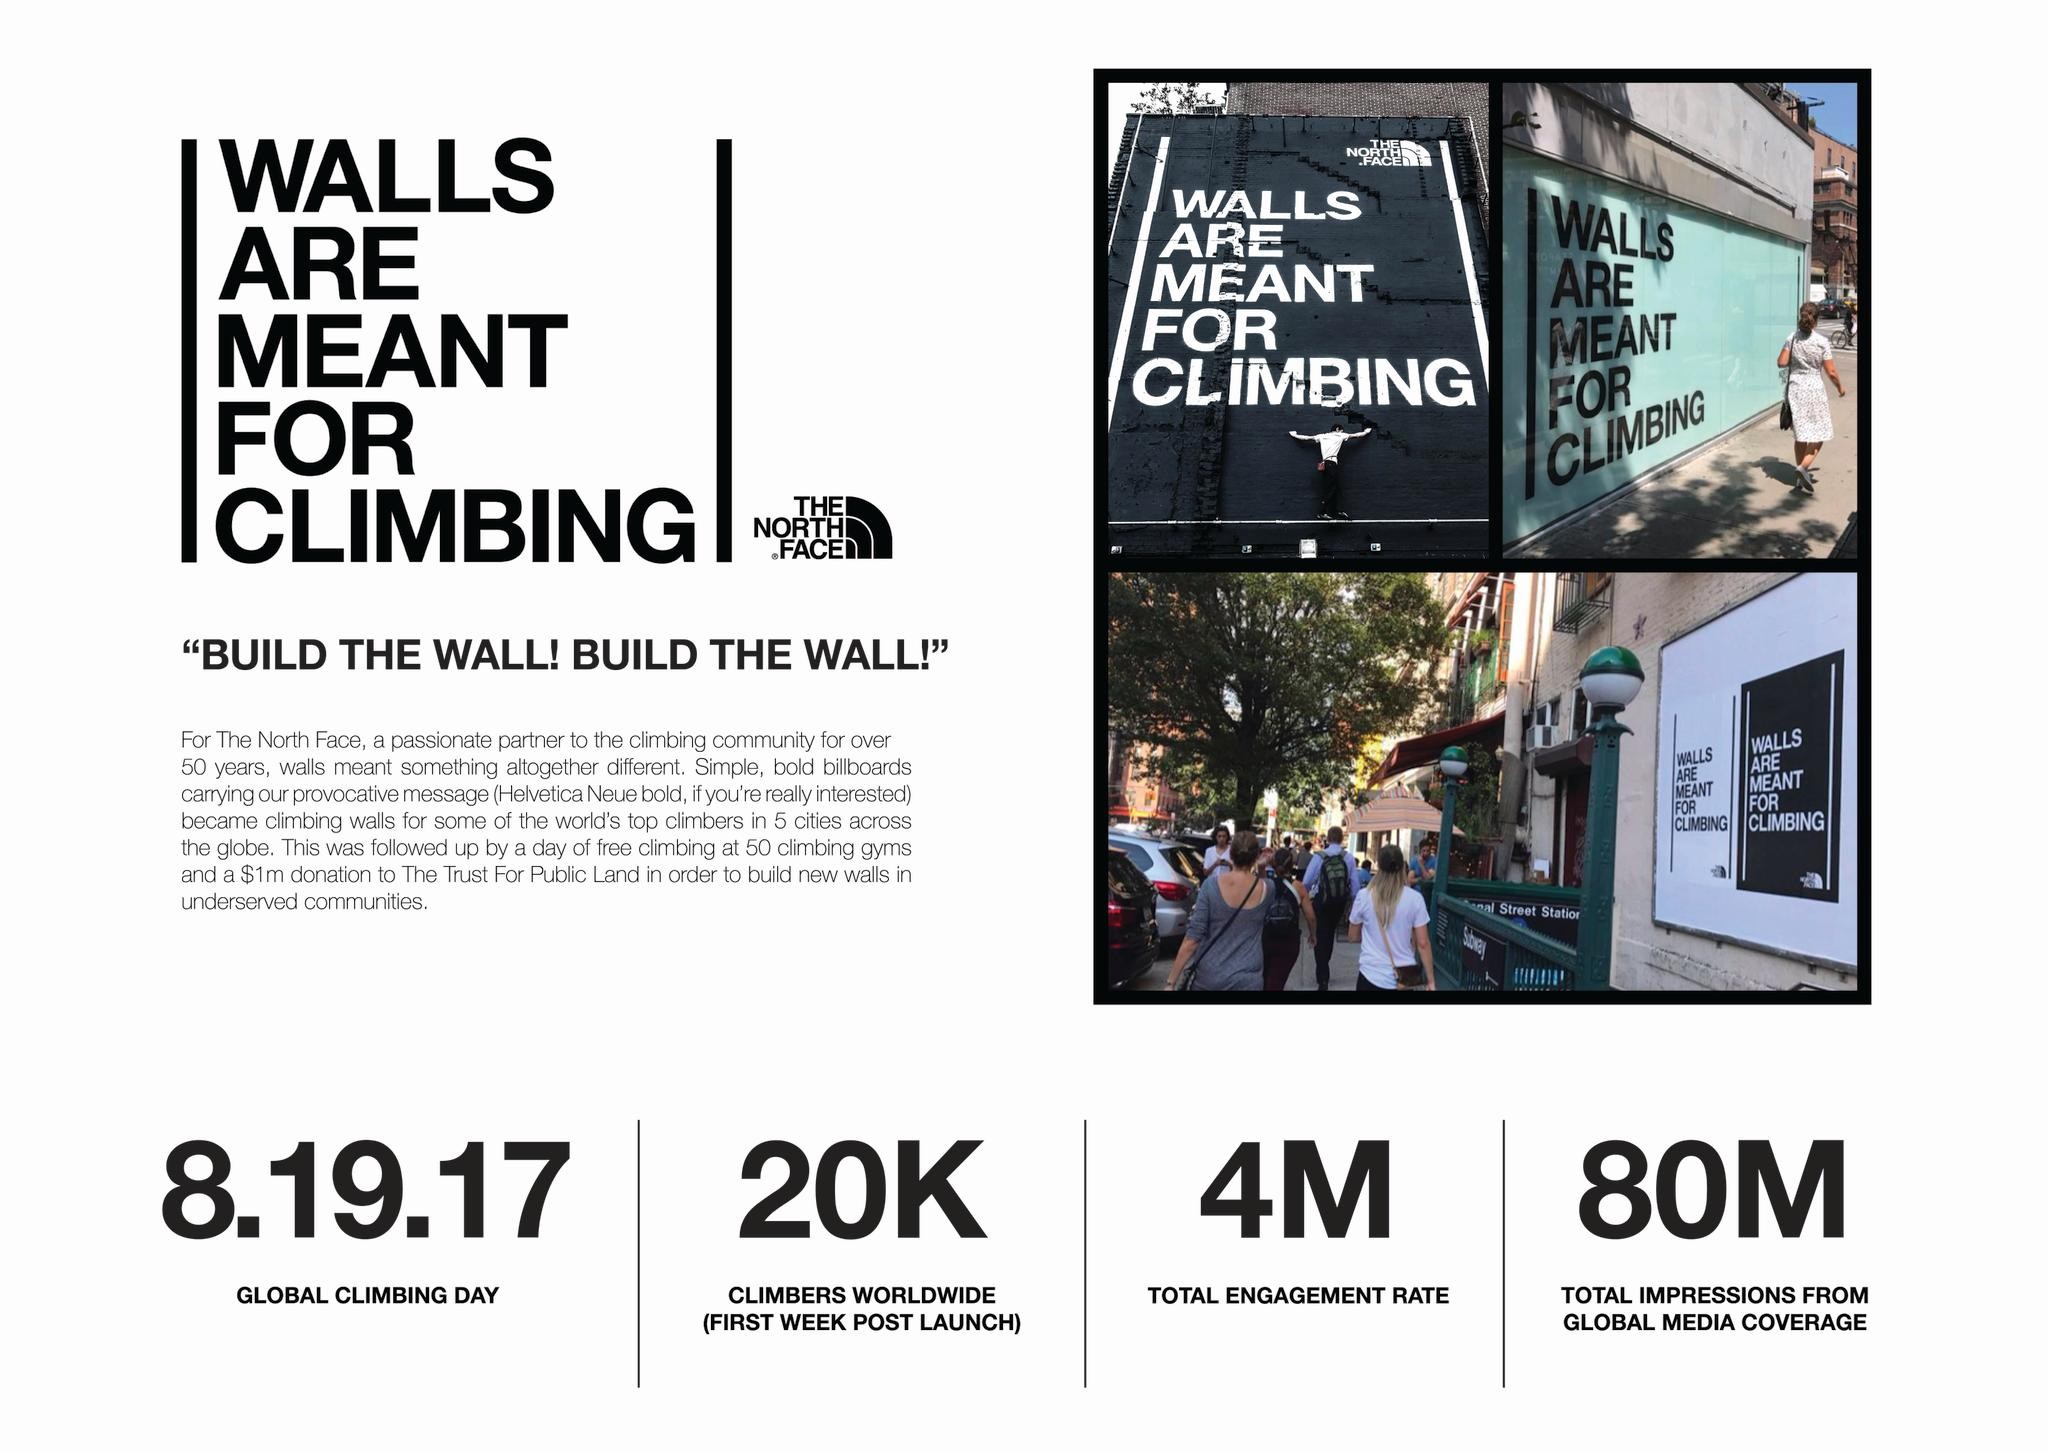 The North Face "Walls are Meant for Climbing" boards turned social tensio